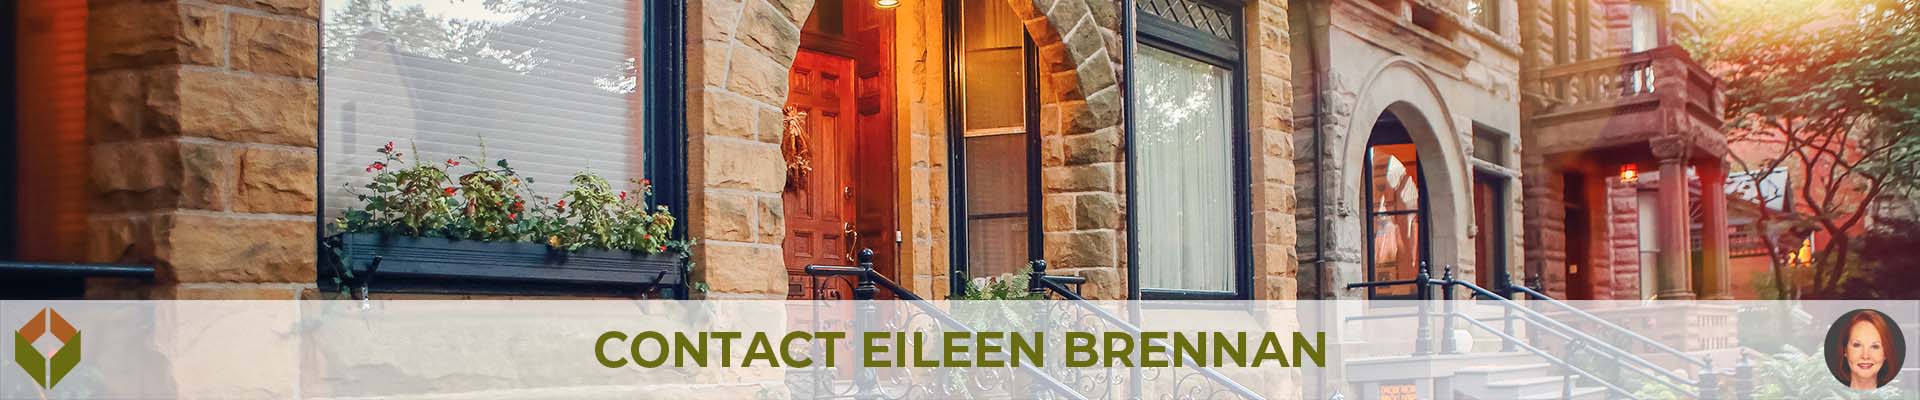 Contact Eileen Brennan - Chicago Area Real Estate Agent